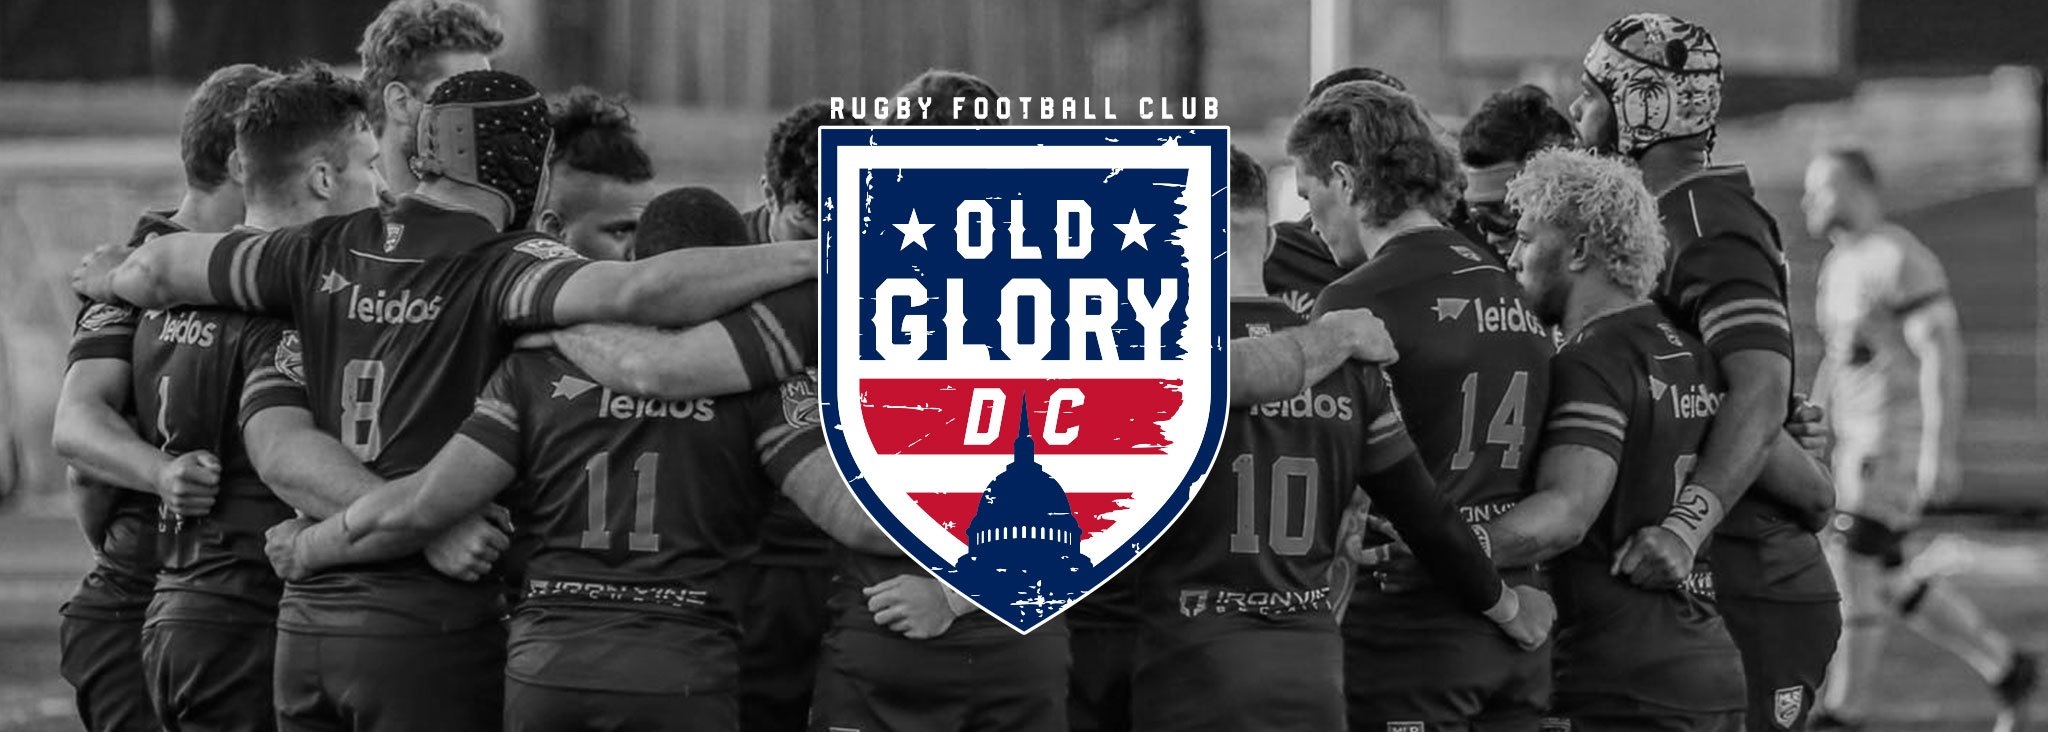 old glory dc rugby jersey